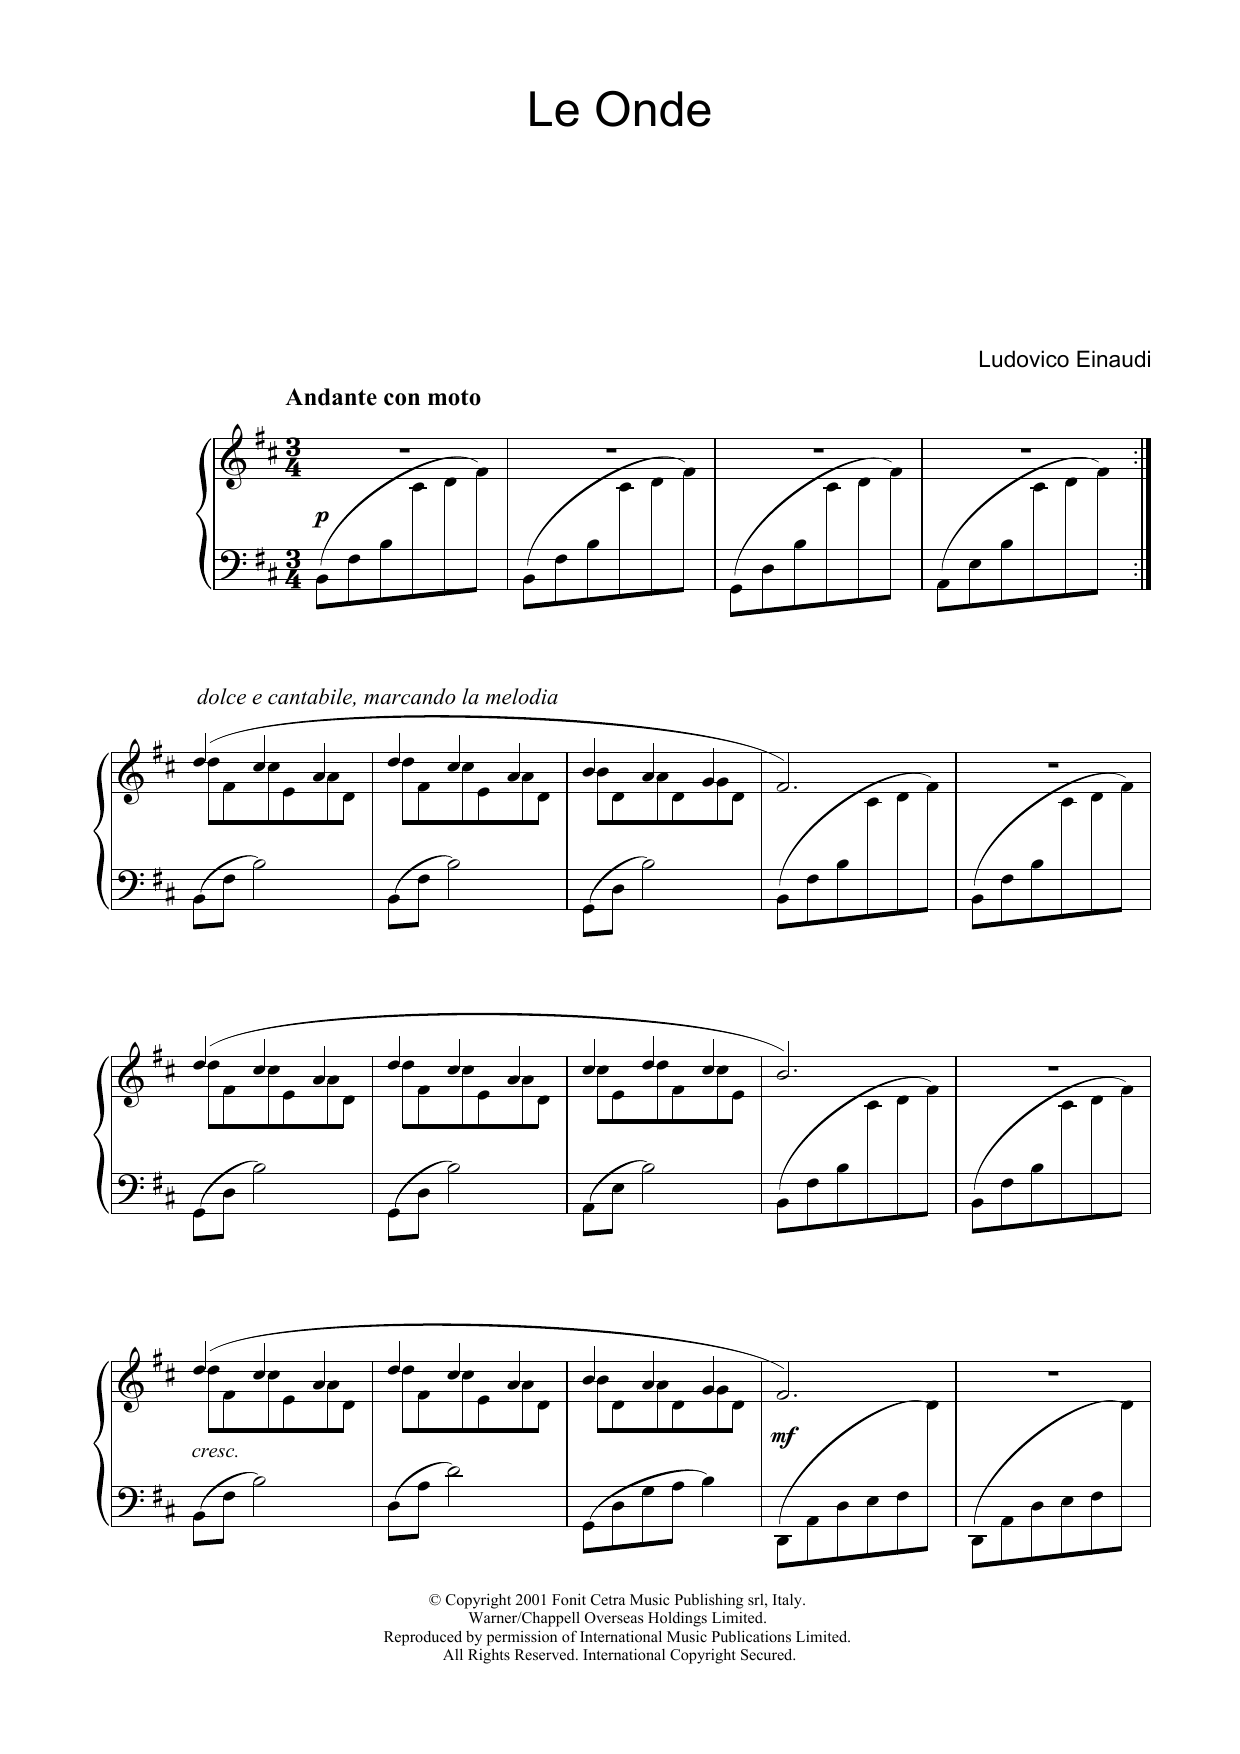 Ludovico Einaudi Le Onde sheet music notes and chords. Download Printable PDF.